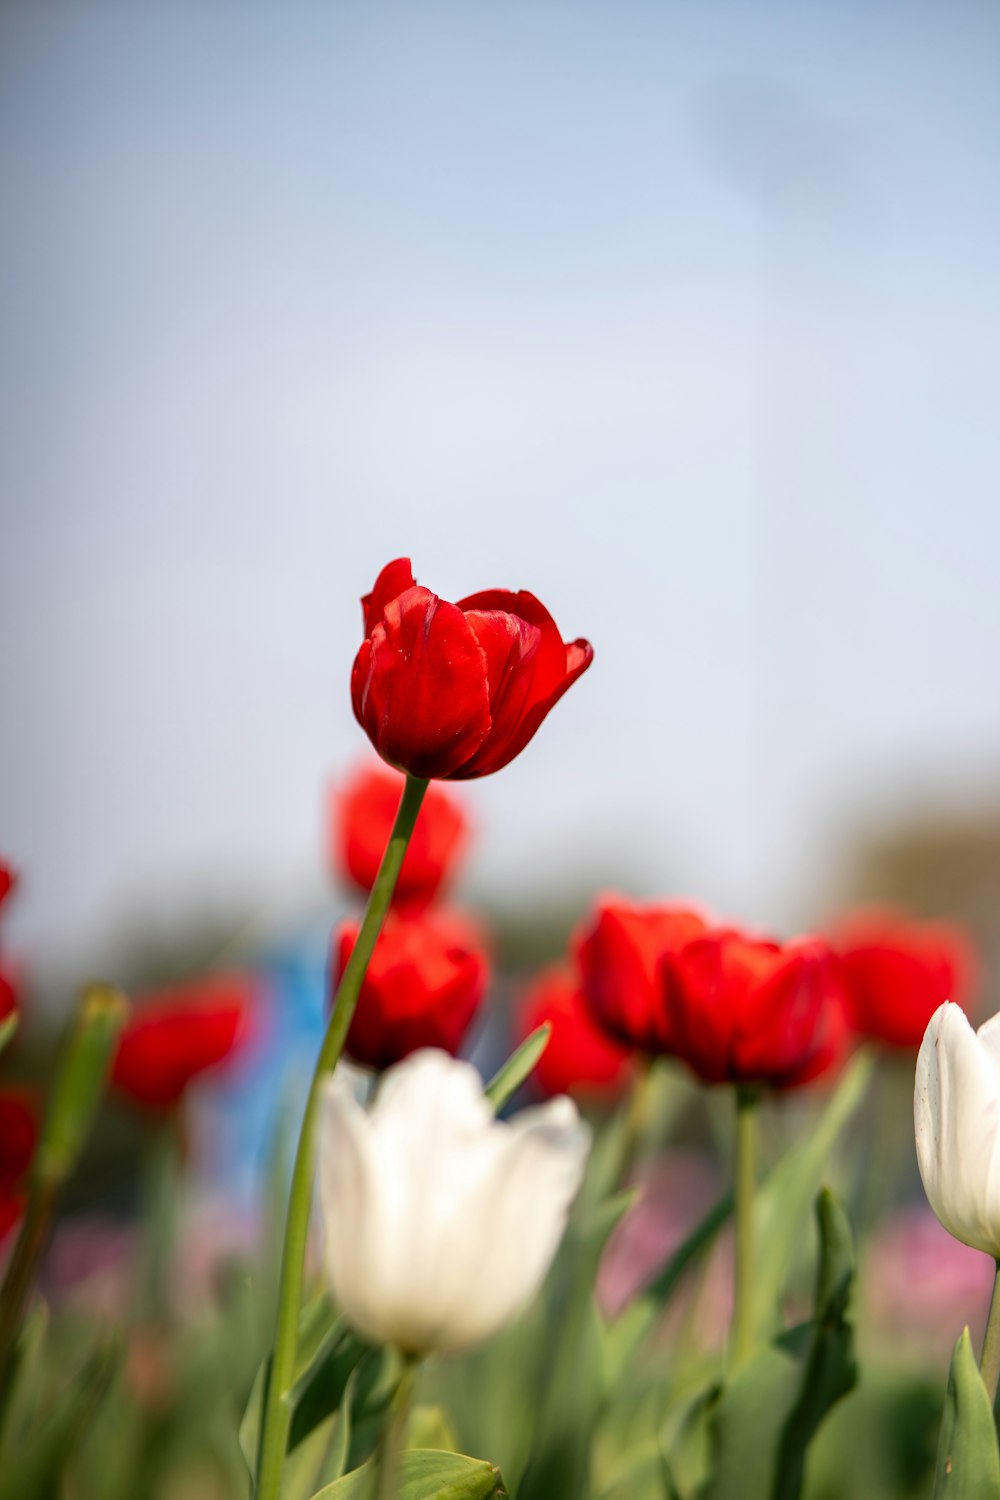 a field of red and white tulips with a blue sky in the background